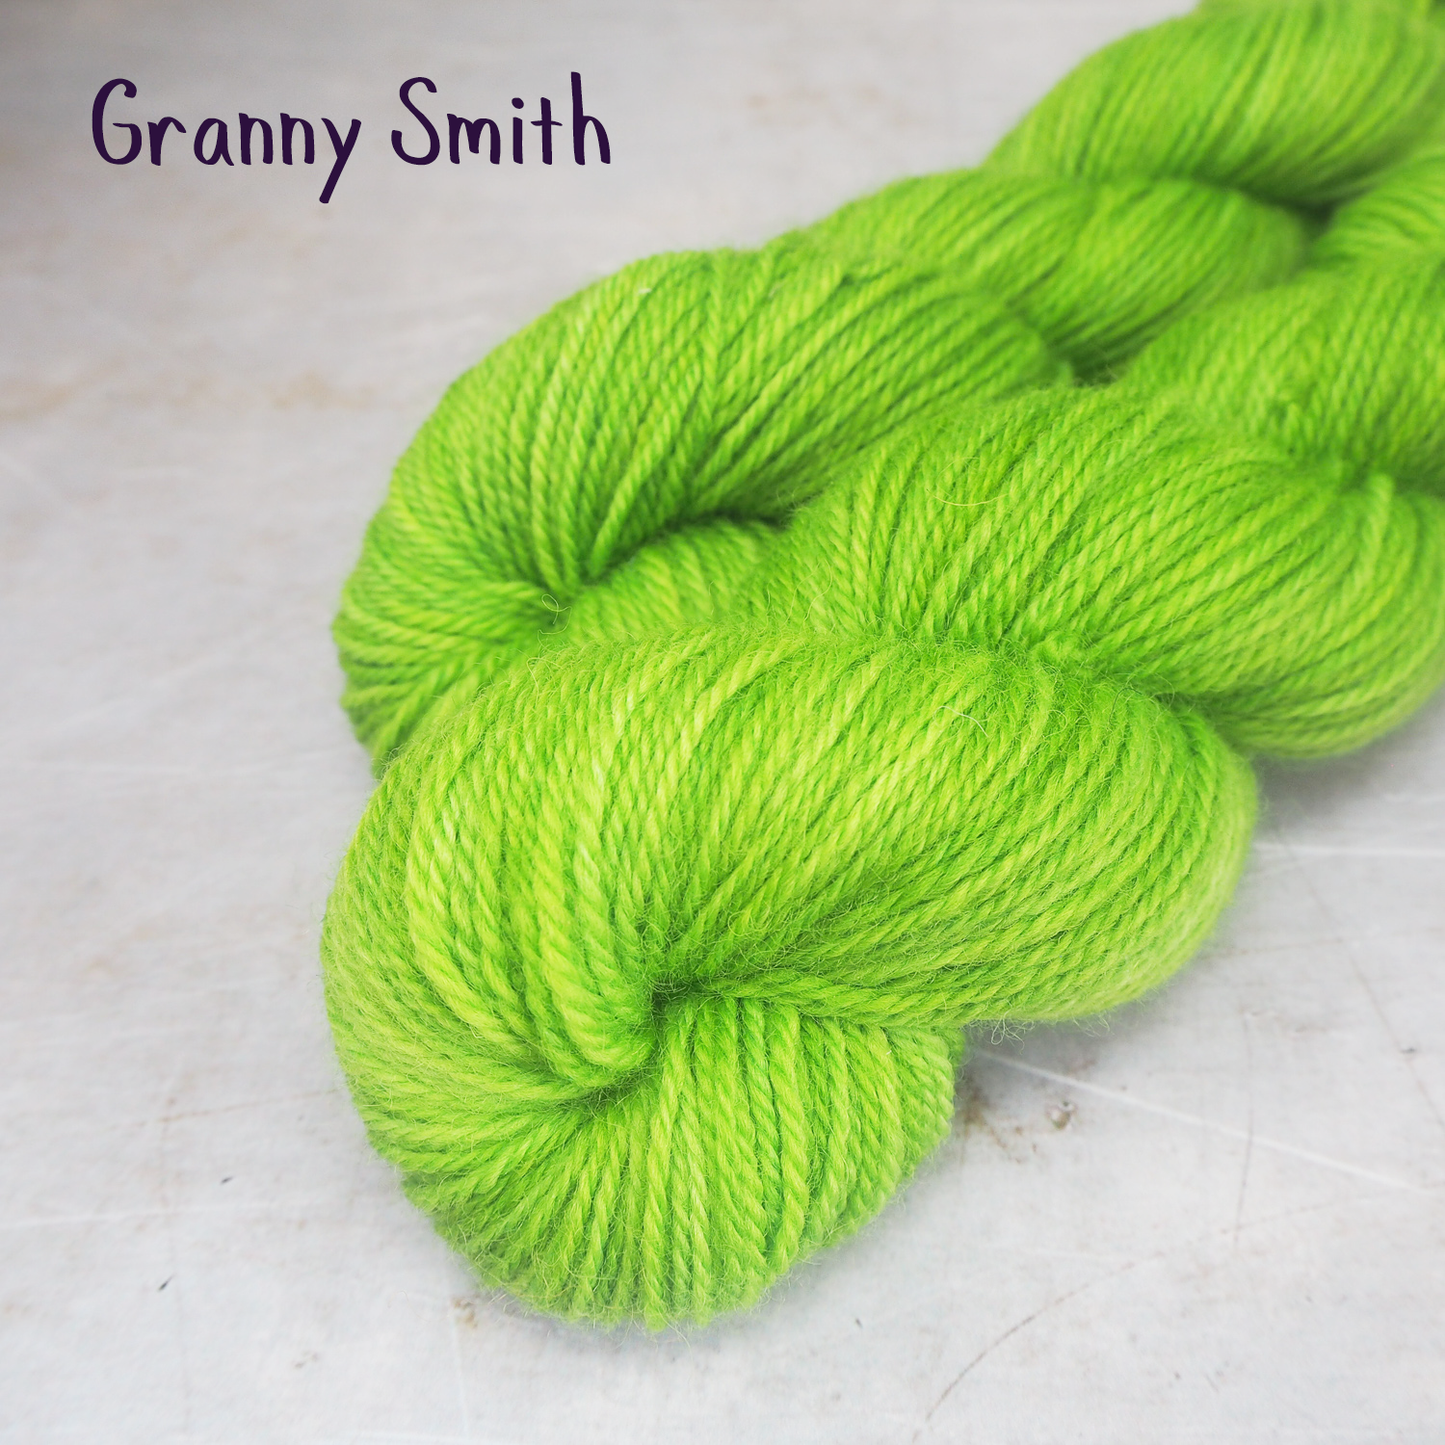 Two skeins of soft, DK-weight yarn, hand-dyed a vibrant lime green. 